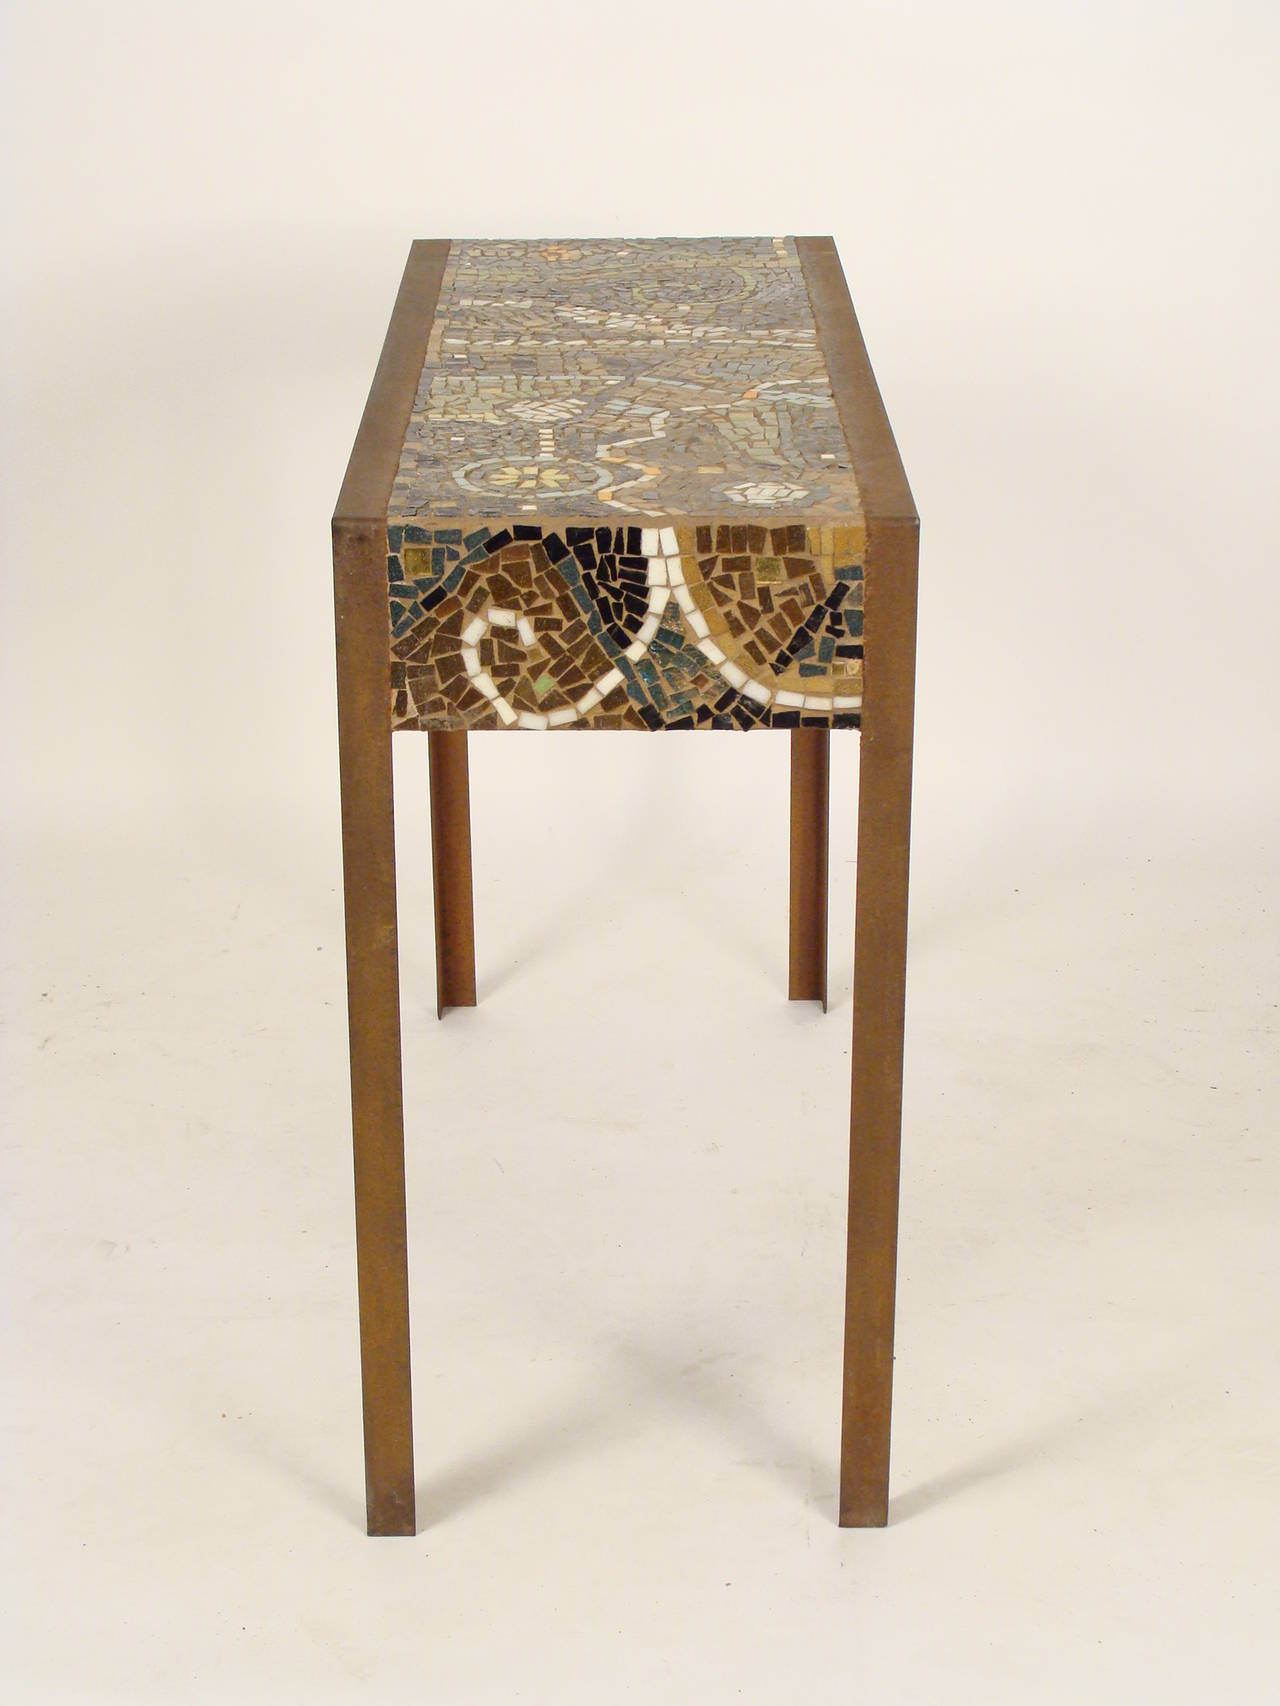 Mosaic tile top and metal console table, circa 1980.